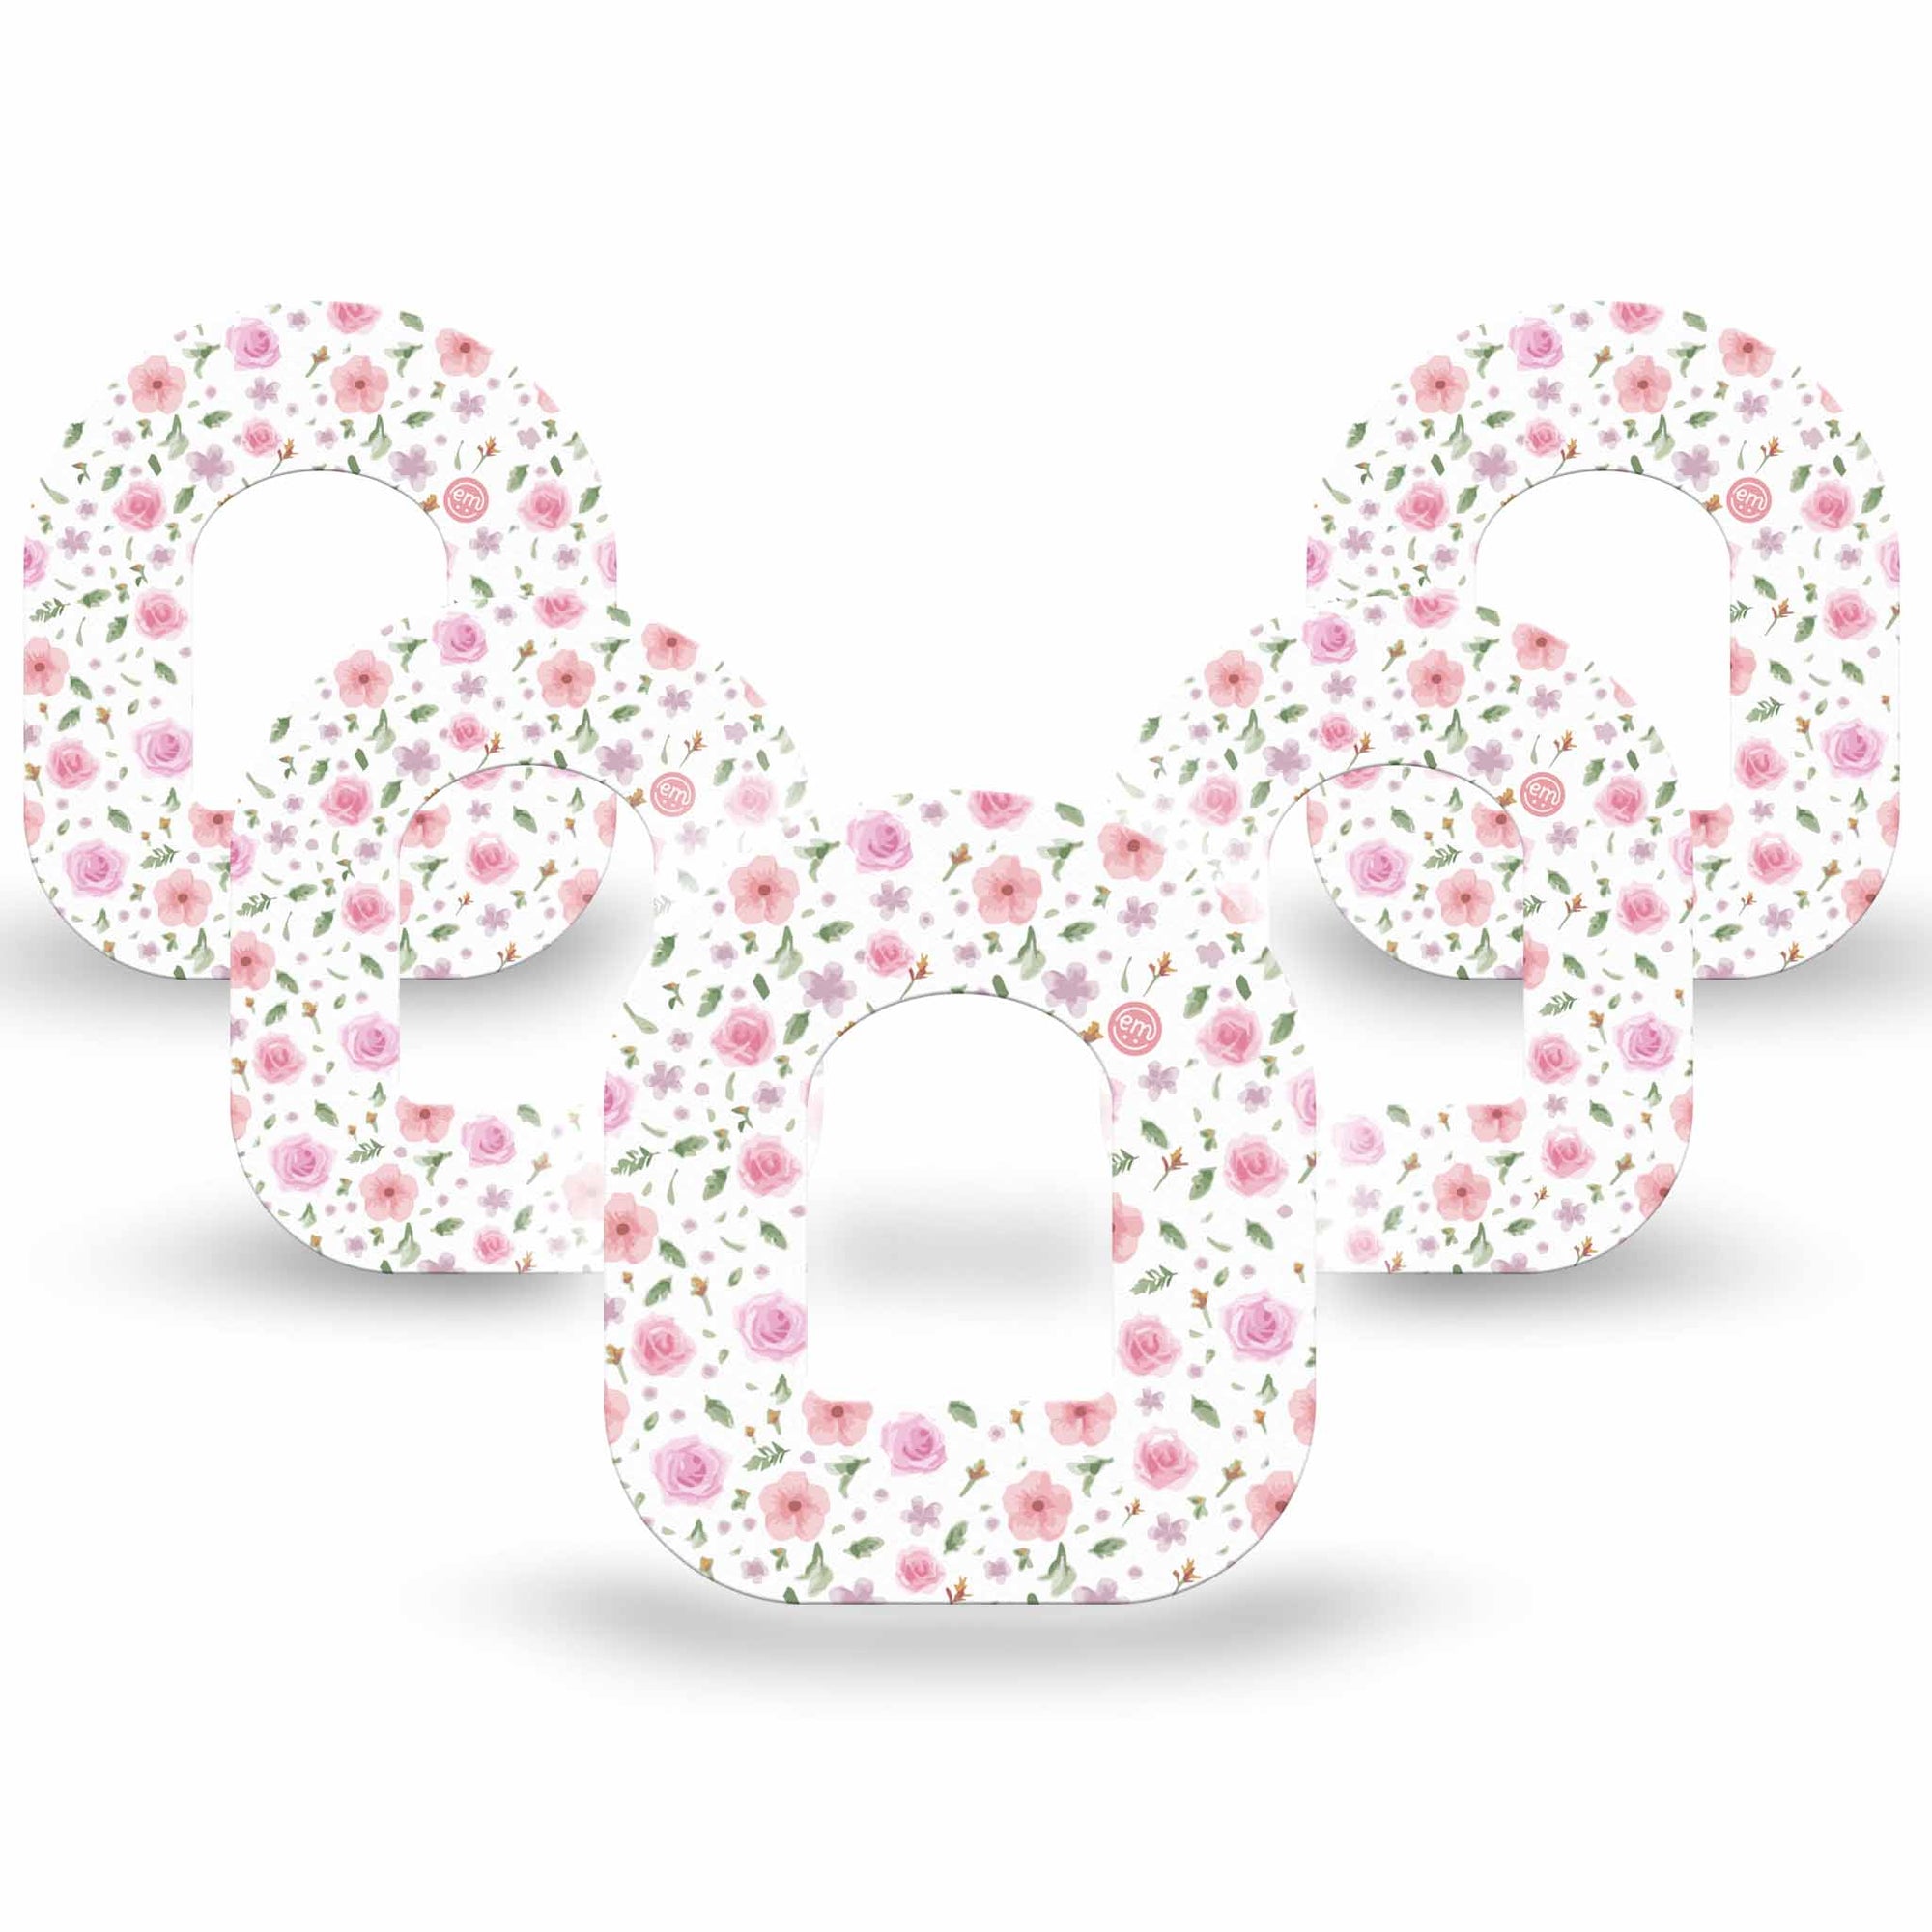 ExpressionMed Pastel Flowers Pod Tape